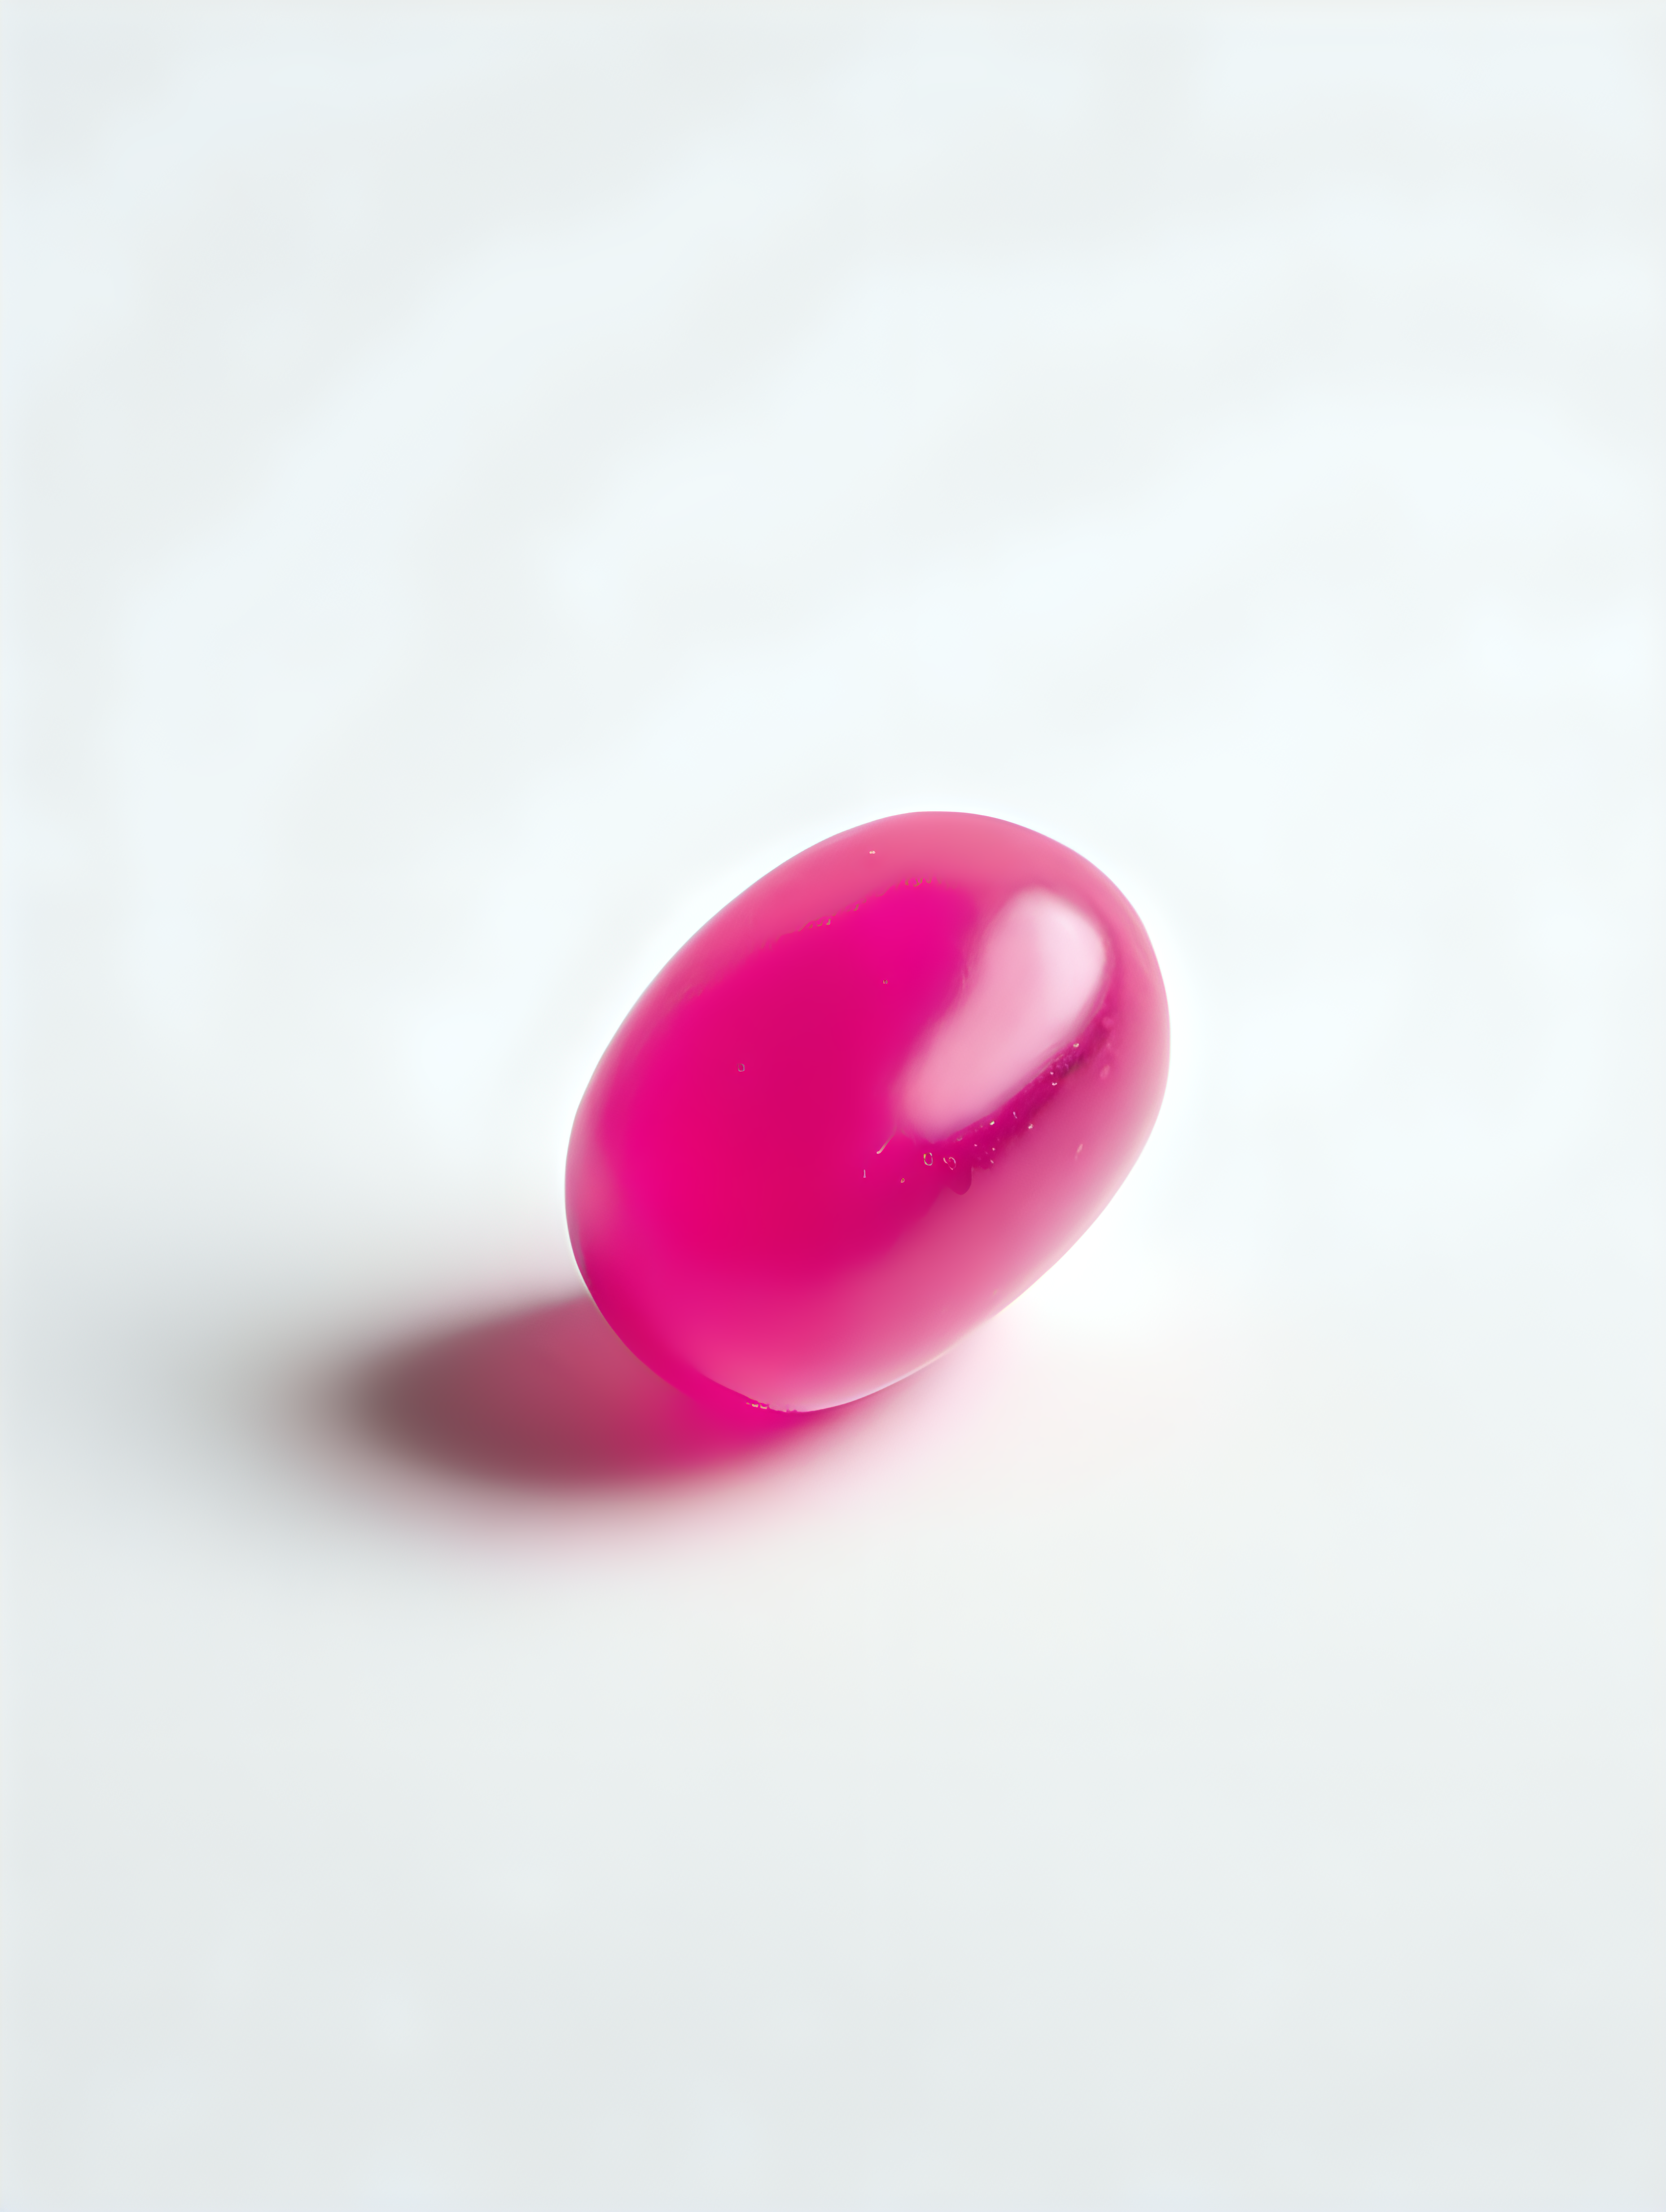 ARTISTIC STUDIO PHOTOGRAPH OF A PINK JELLYBEAN ON A WHITE BACKGROUND
 